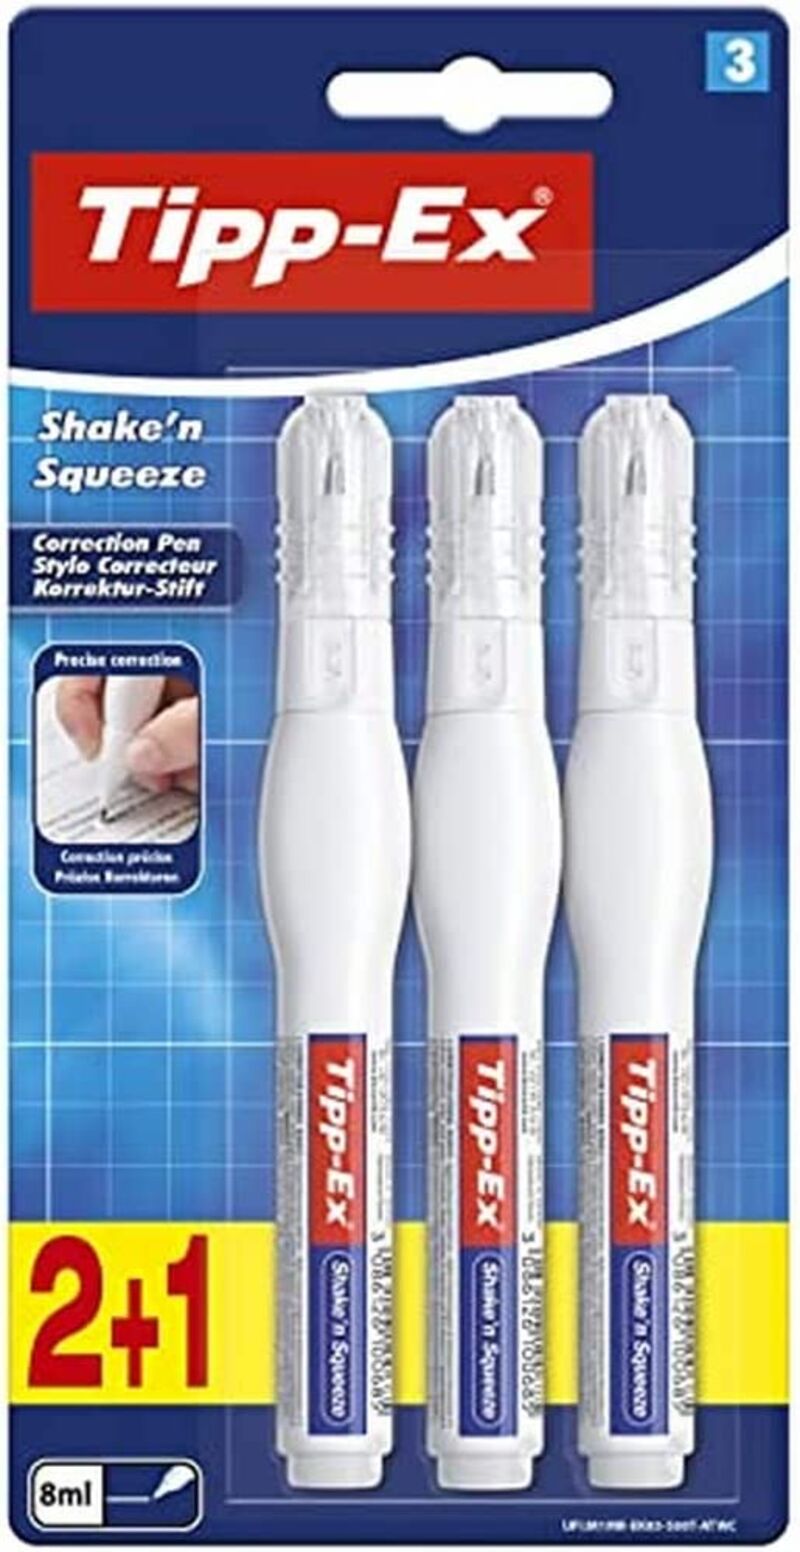 blister shake n squeeze bl2+1 isp eu - 8349871 - 